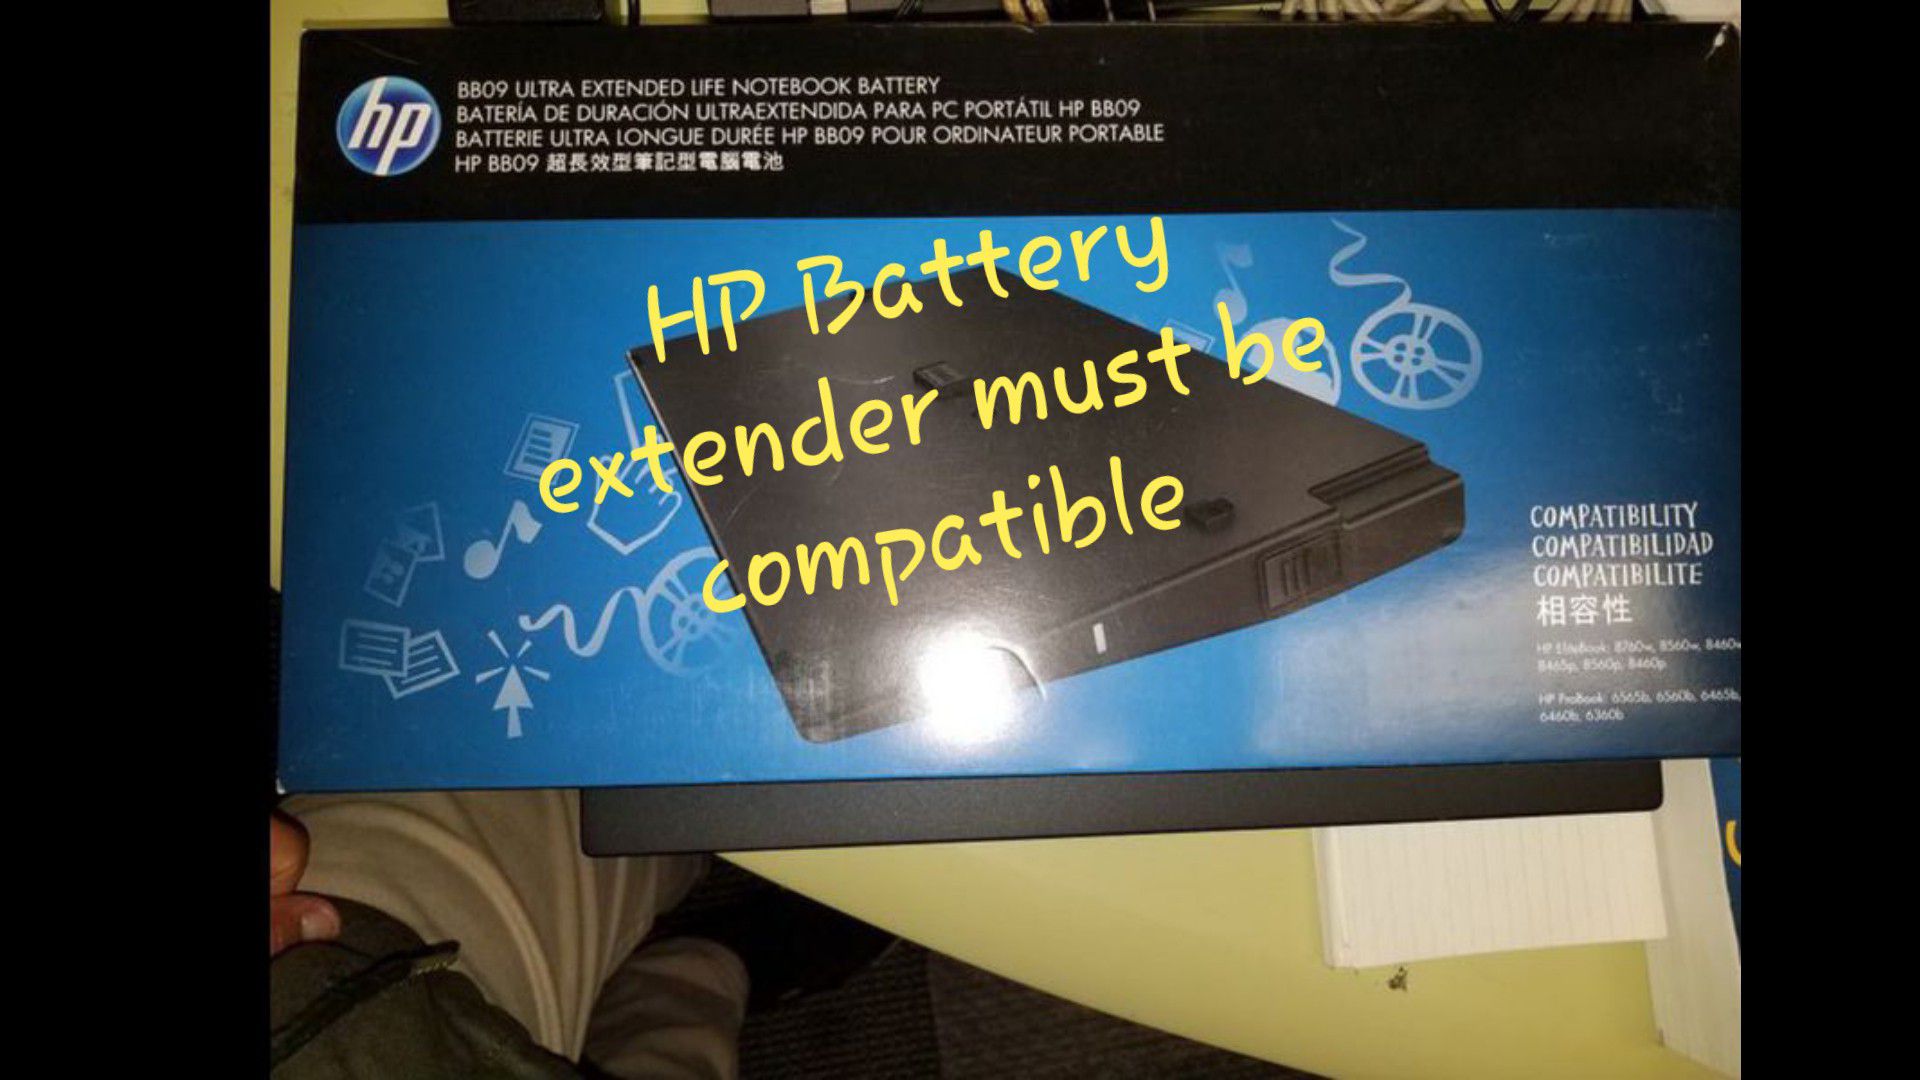 HP BB09 Ultra extended life Notebook battery